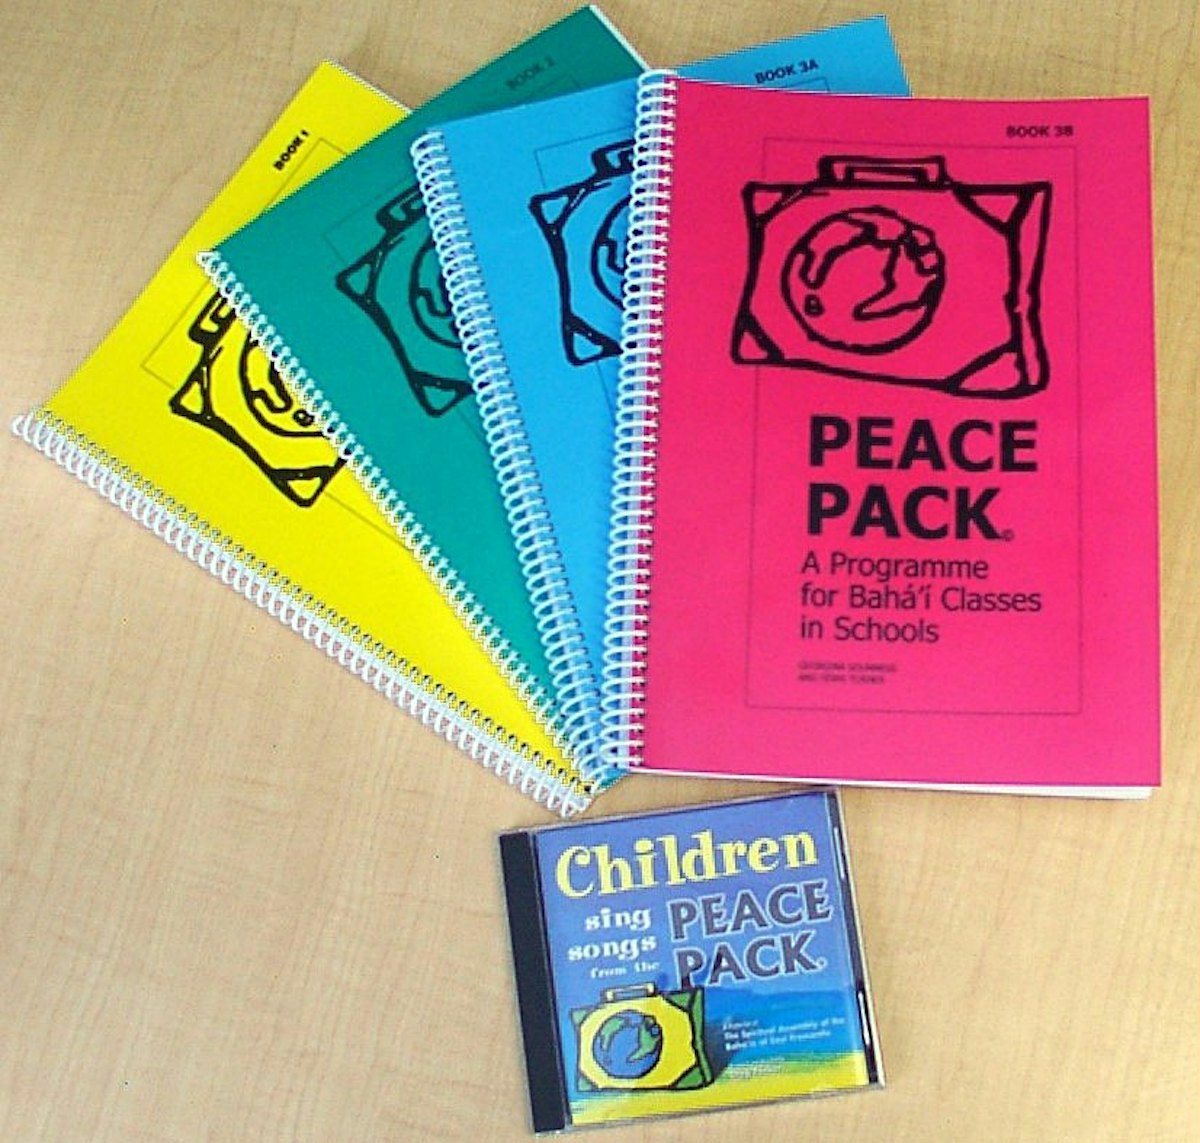 A Baha'i curriculum, known as the Peace Pack, developed in Western Australia for Baha'i Education in State Schools (BESS) classes. It is accompanied by a CD of songs for children, prepared by Western Australian Baha'i musician Greg Parker.